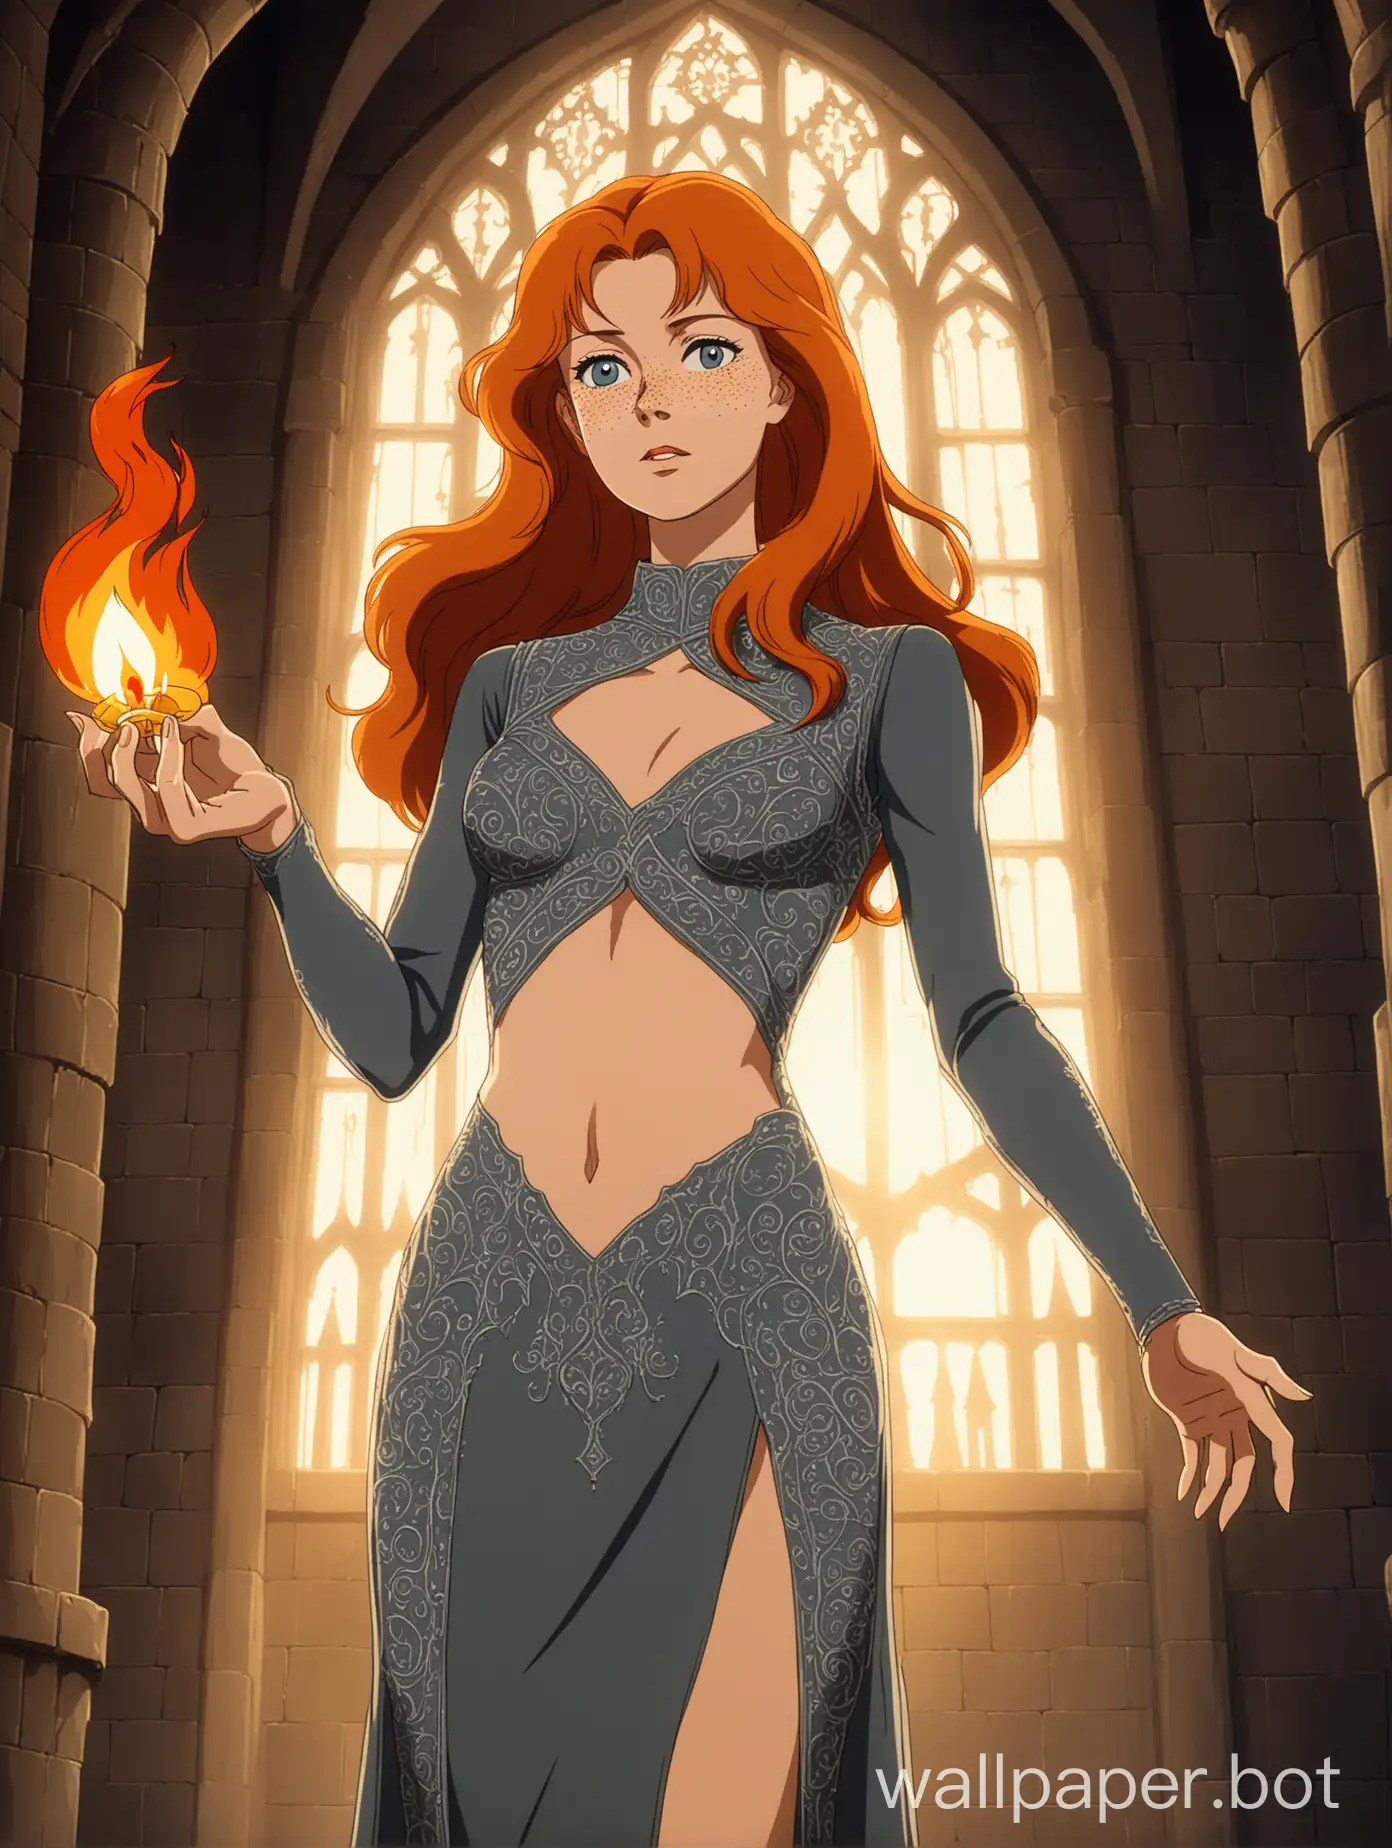 a young and attractive white woman, she has long wavy orange hair, standing regally, holding flame in one hand, elegant and slender, sharp face, lots of freckles, dignified and confident, amazed expression, wearing a sheer thin dark grey skintight dress, large diamond-shaped stomach cutout, midriff, she is thin and slender, ornate stitching, medieval elegance, castle interior, 1980s retro anime, vibrant colors, golden hour lighting